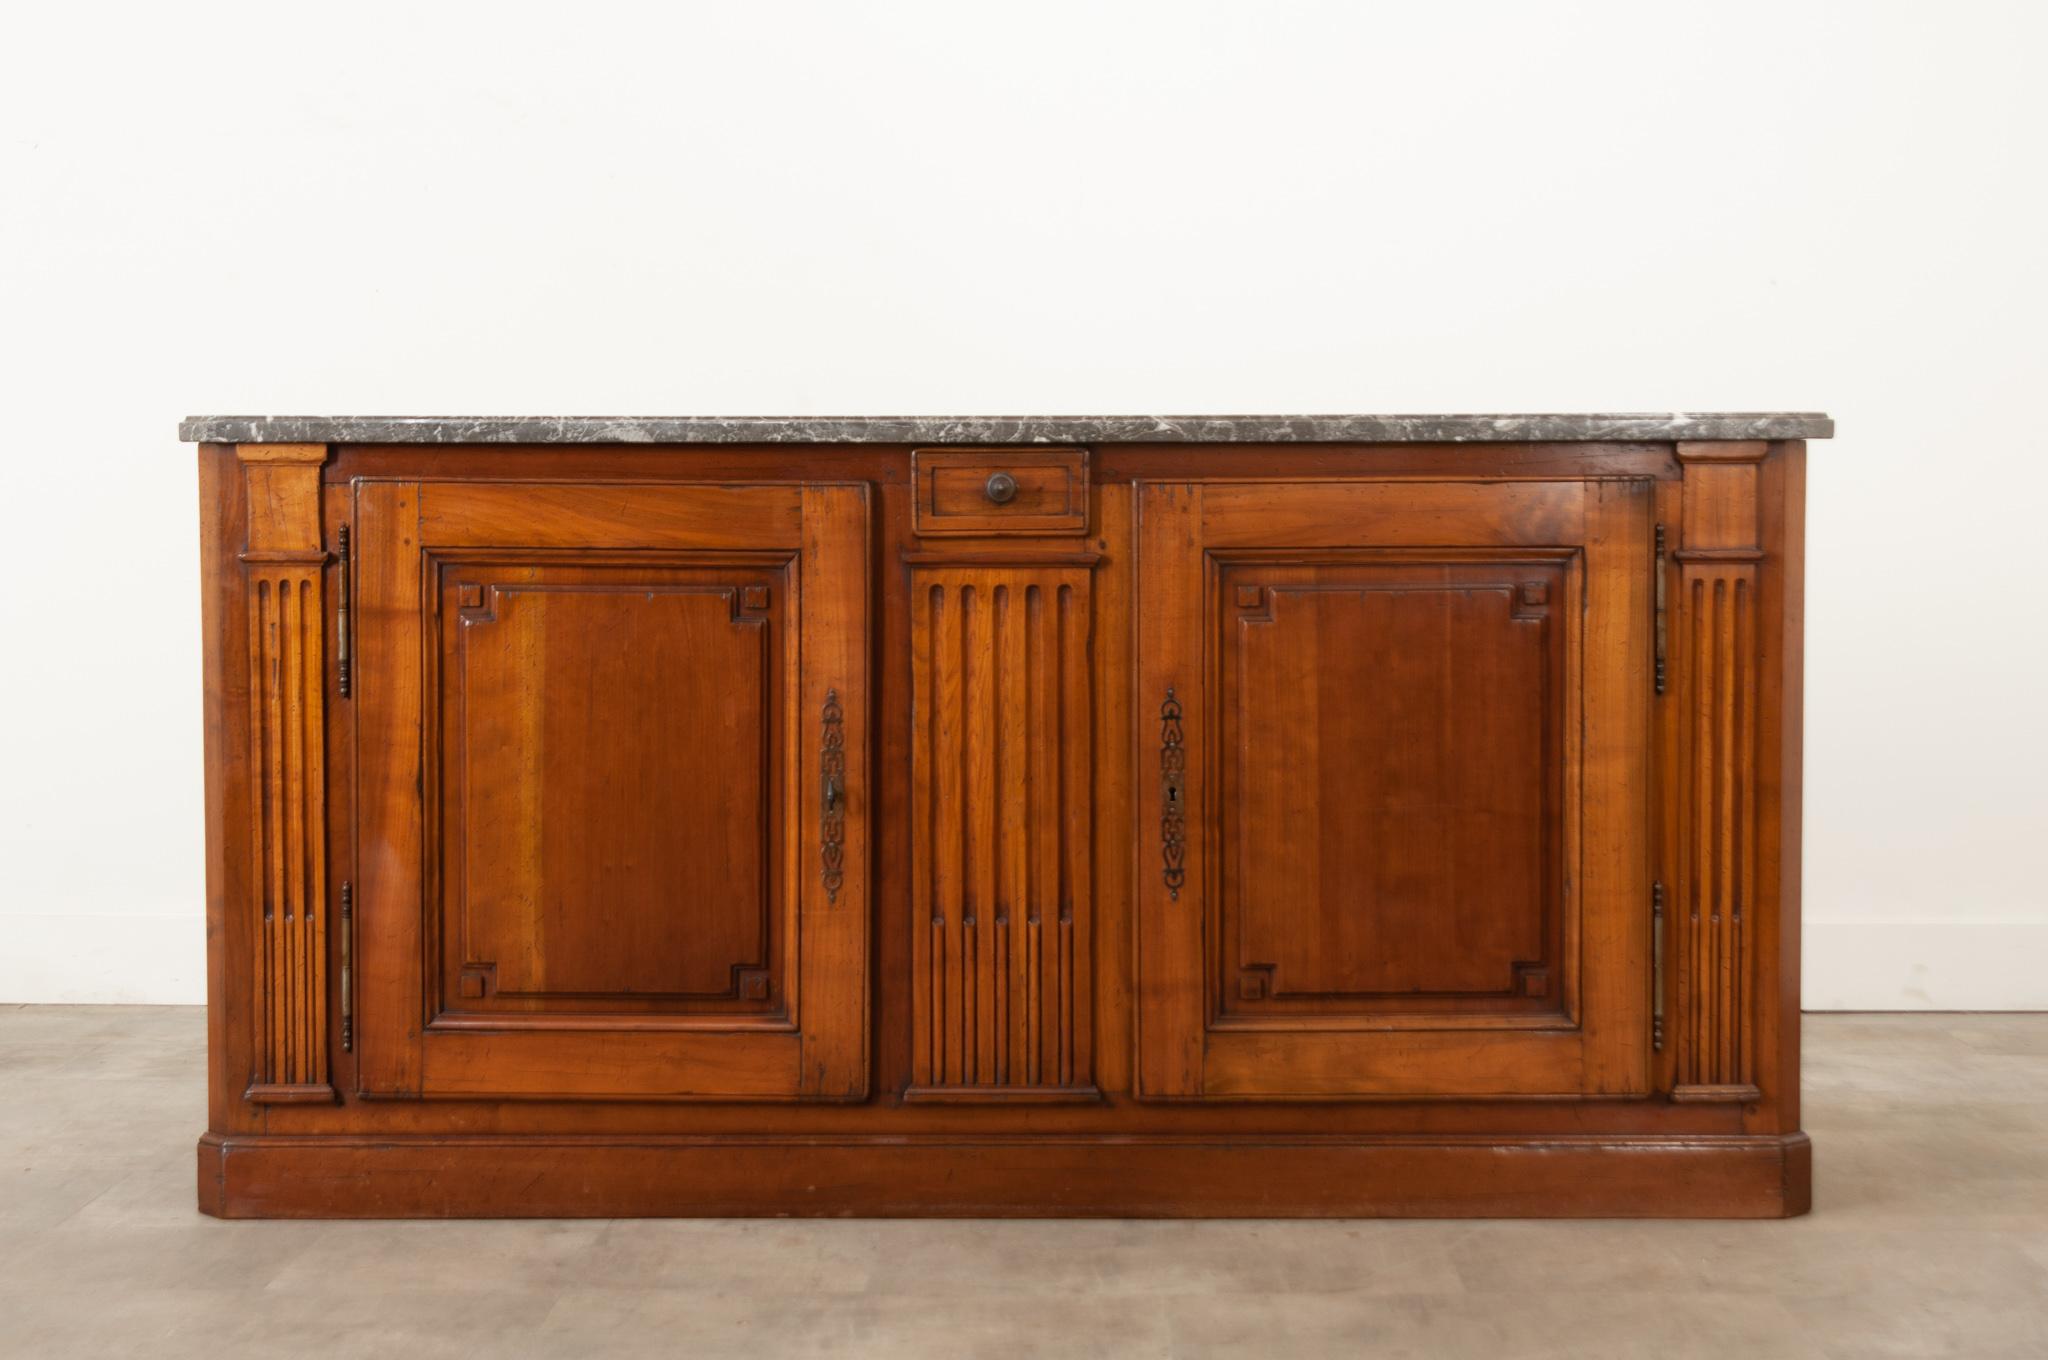 A beautiful fruitwood transitional enfilade circa 1870. The original shaped, canted marble top is gray with beautiful white veining throughout. Just below the marble top is a small drawer that opens and closes with ease.  Fluted columns flank two